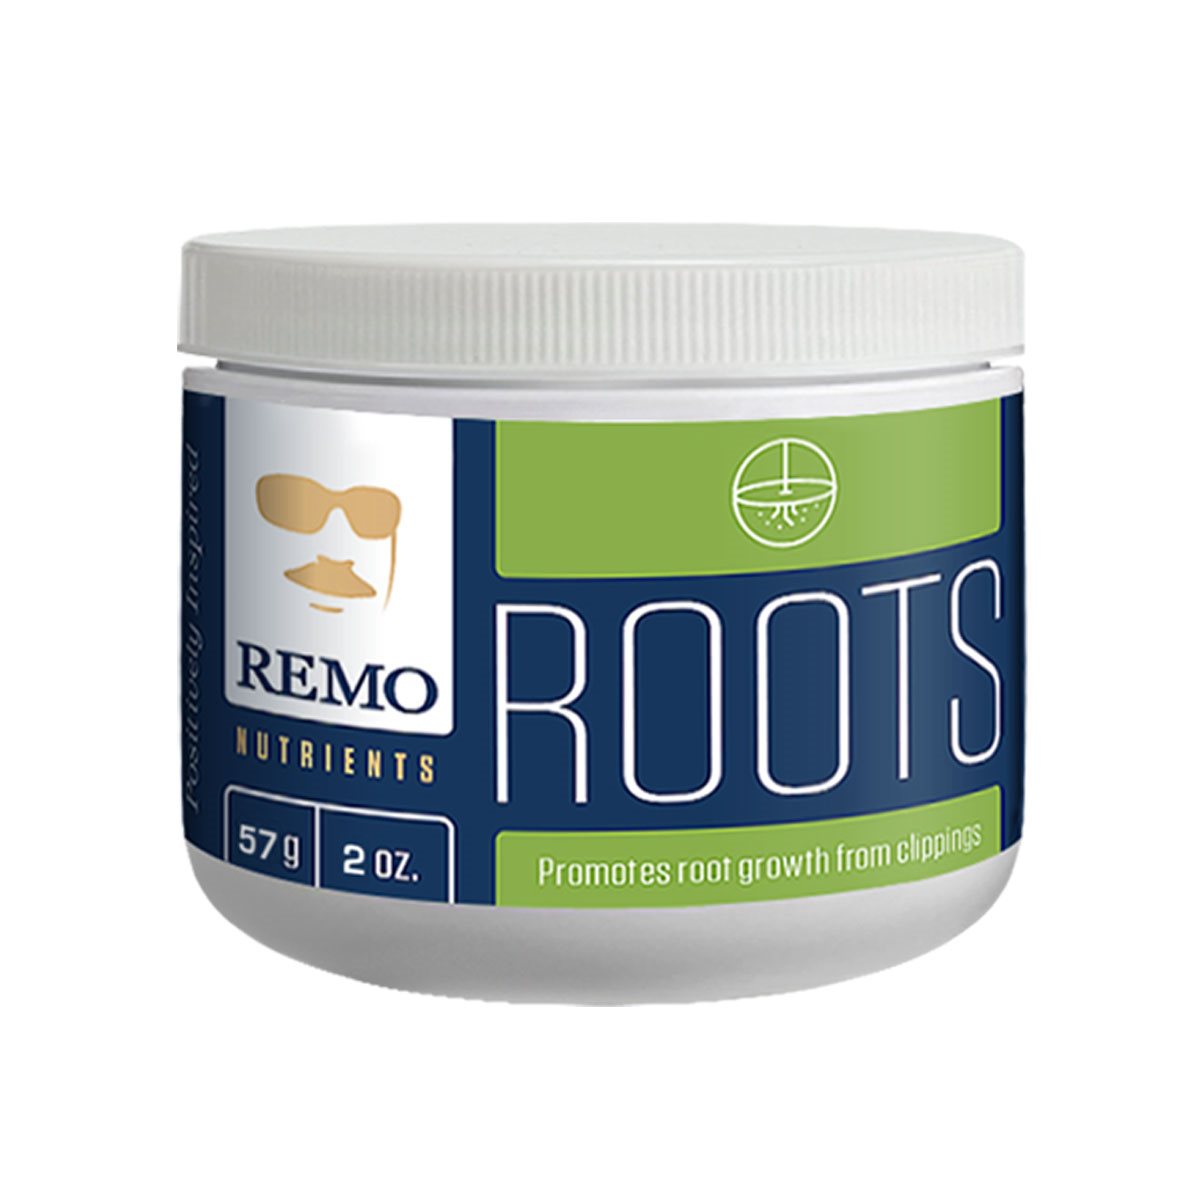 Product Secondary Image:Remo Nutrients Roots